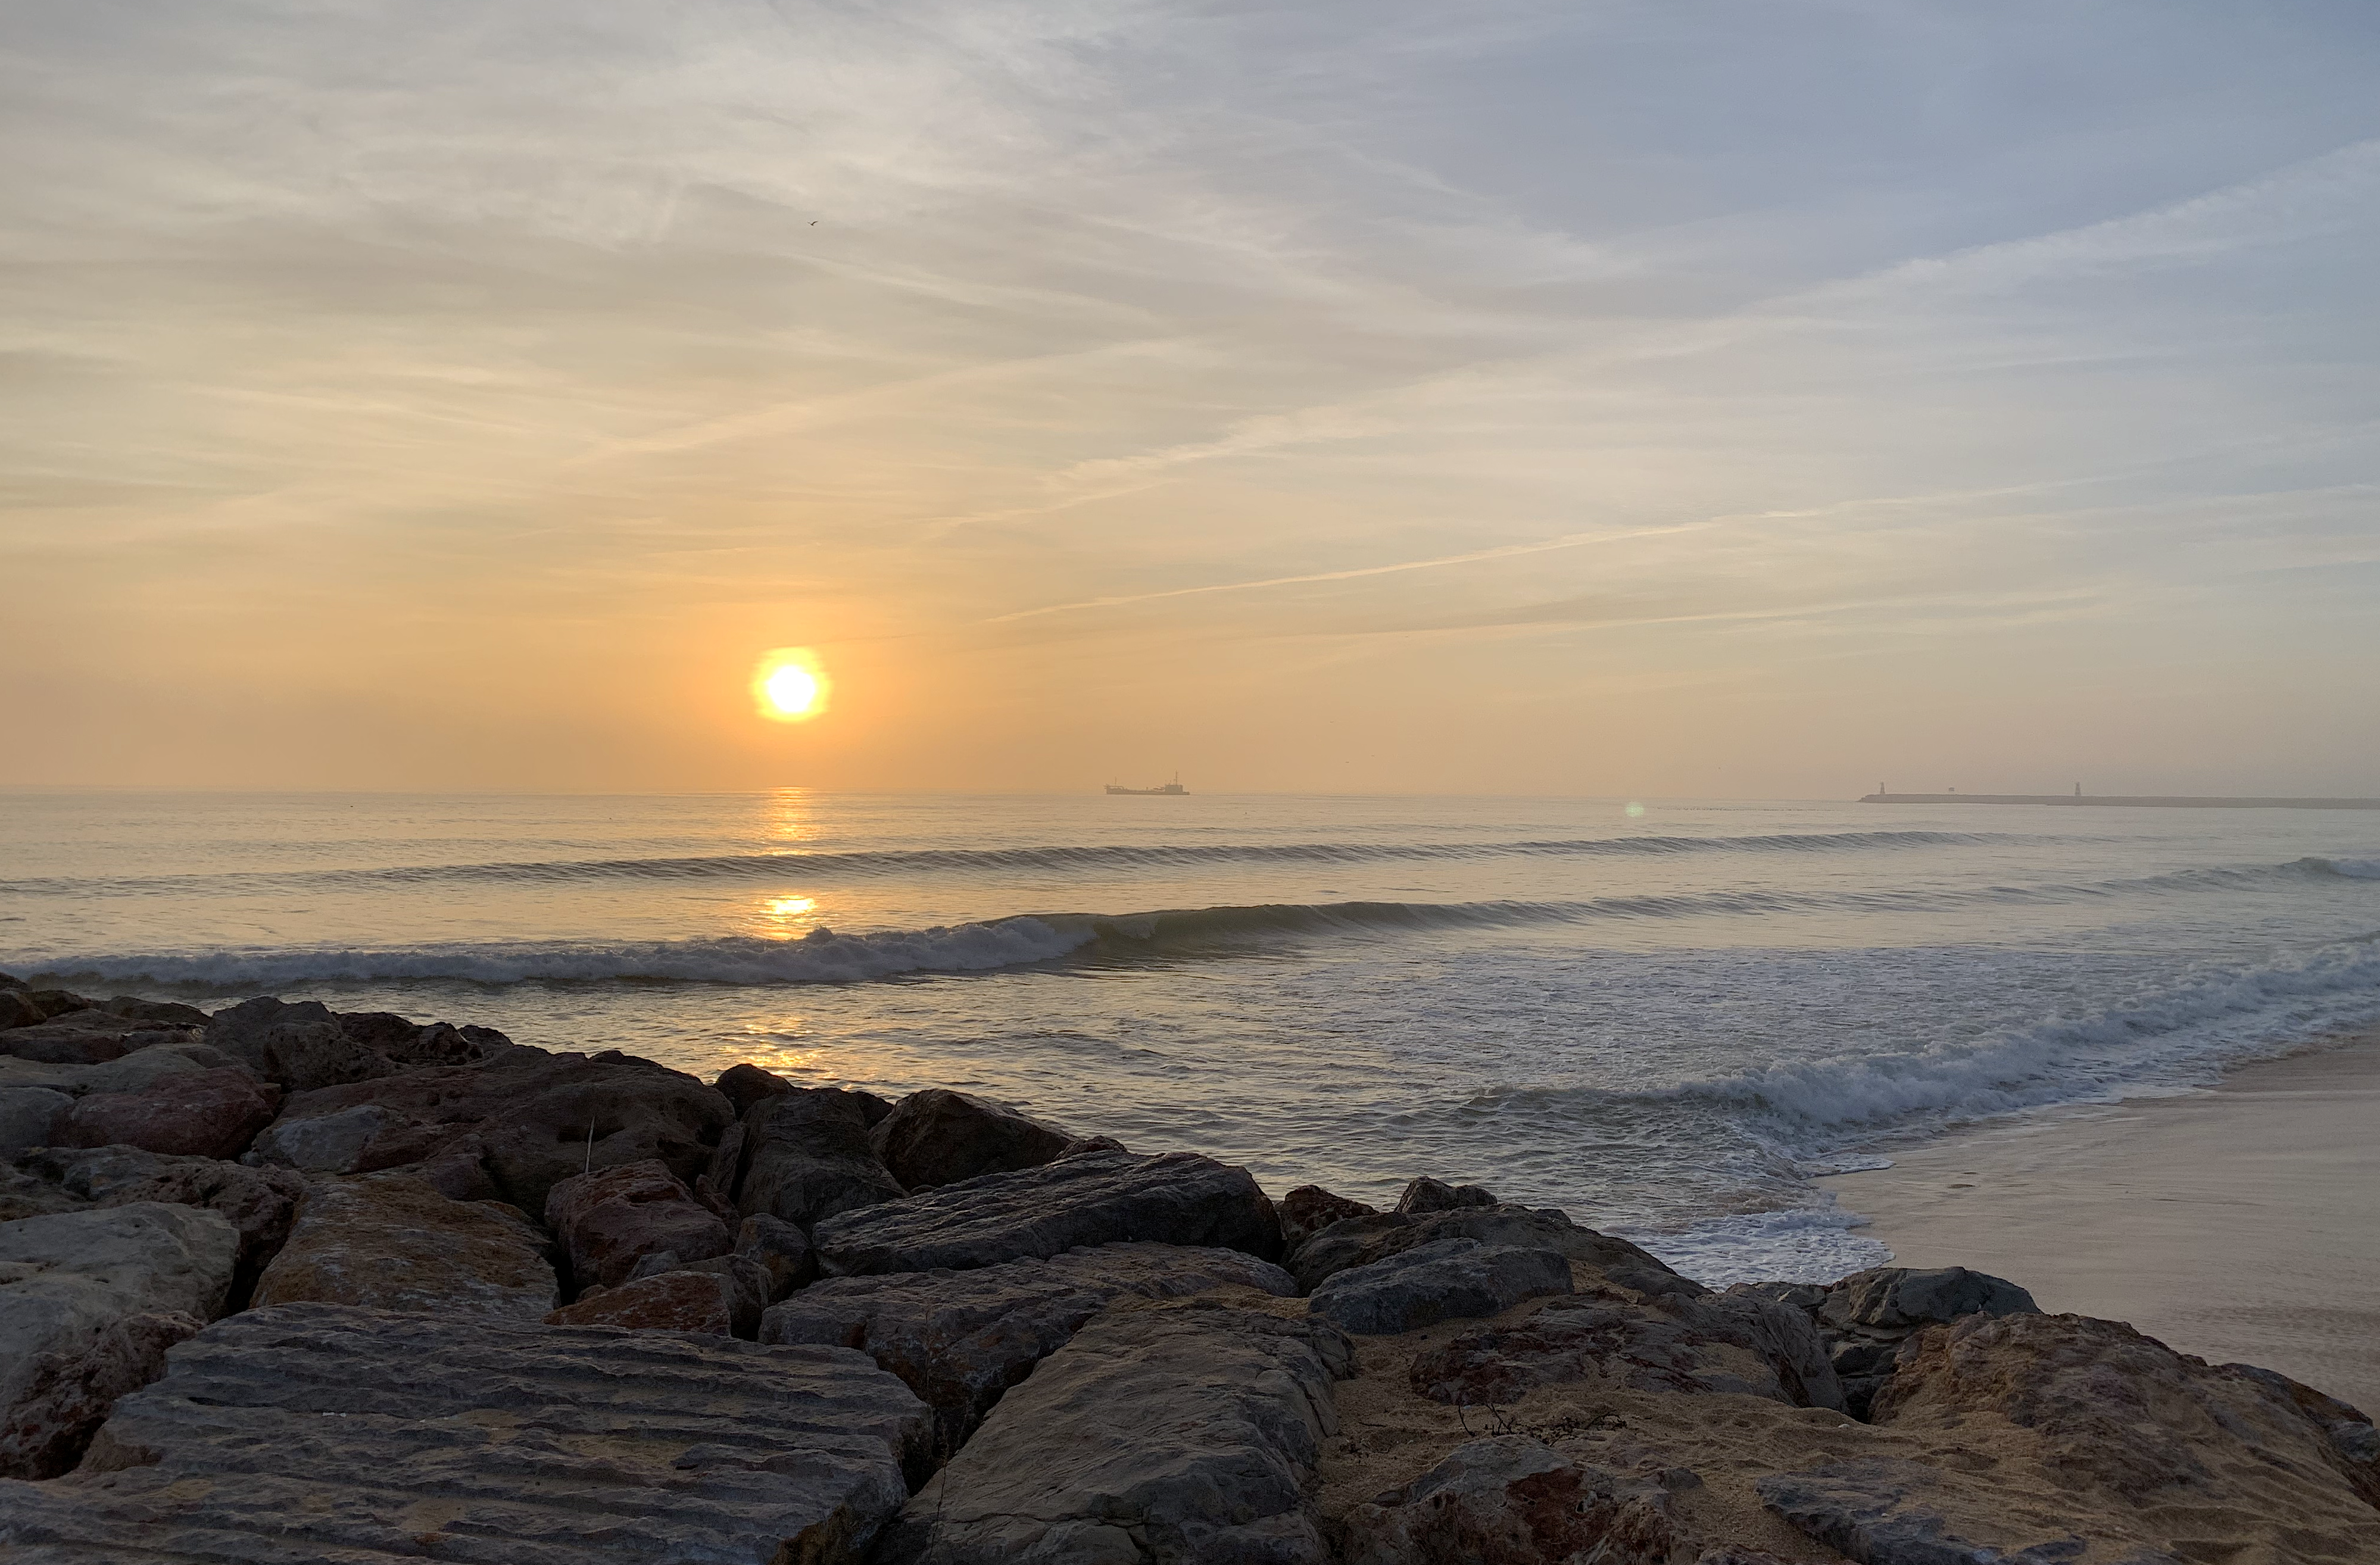 Traveling to Portugal in 2022 – practicalities & first impressions